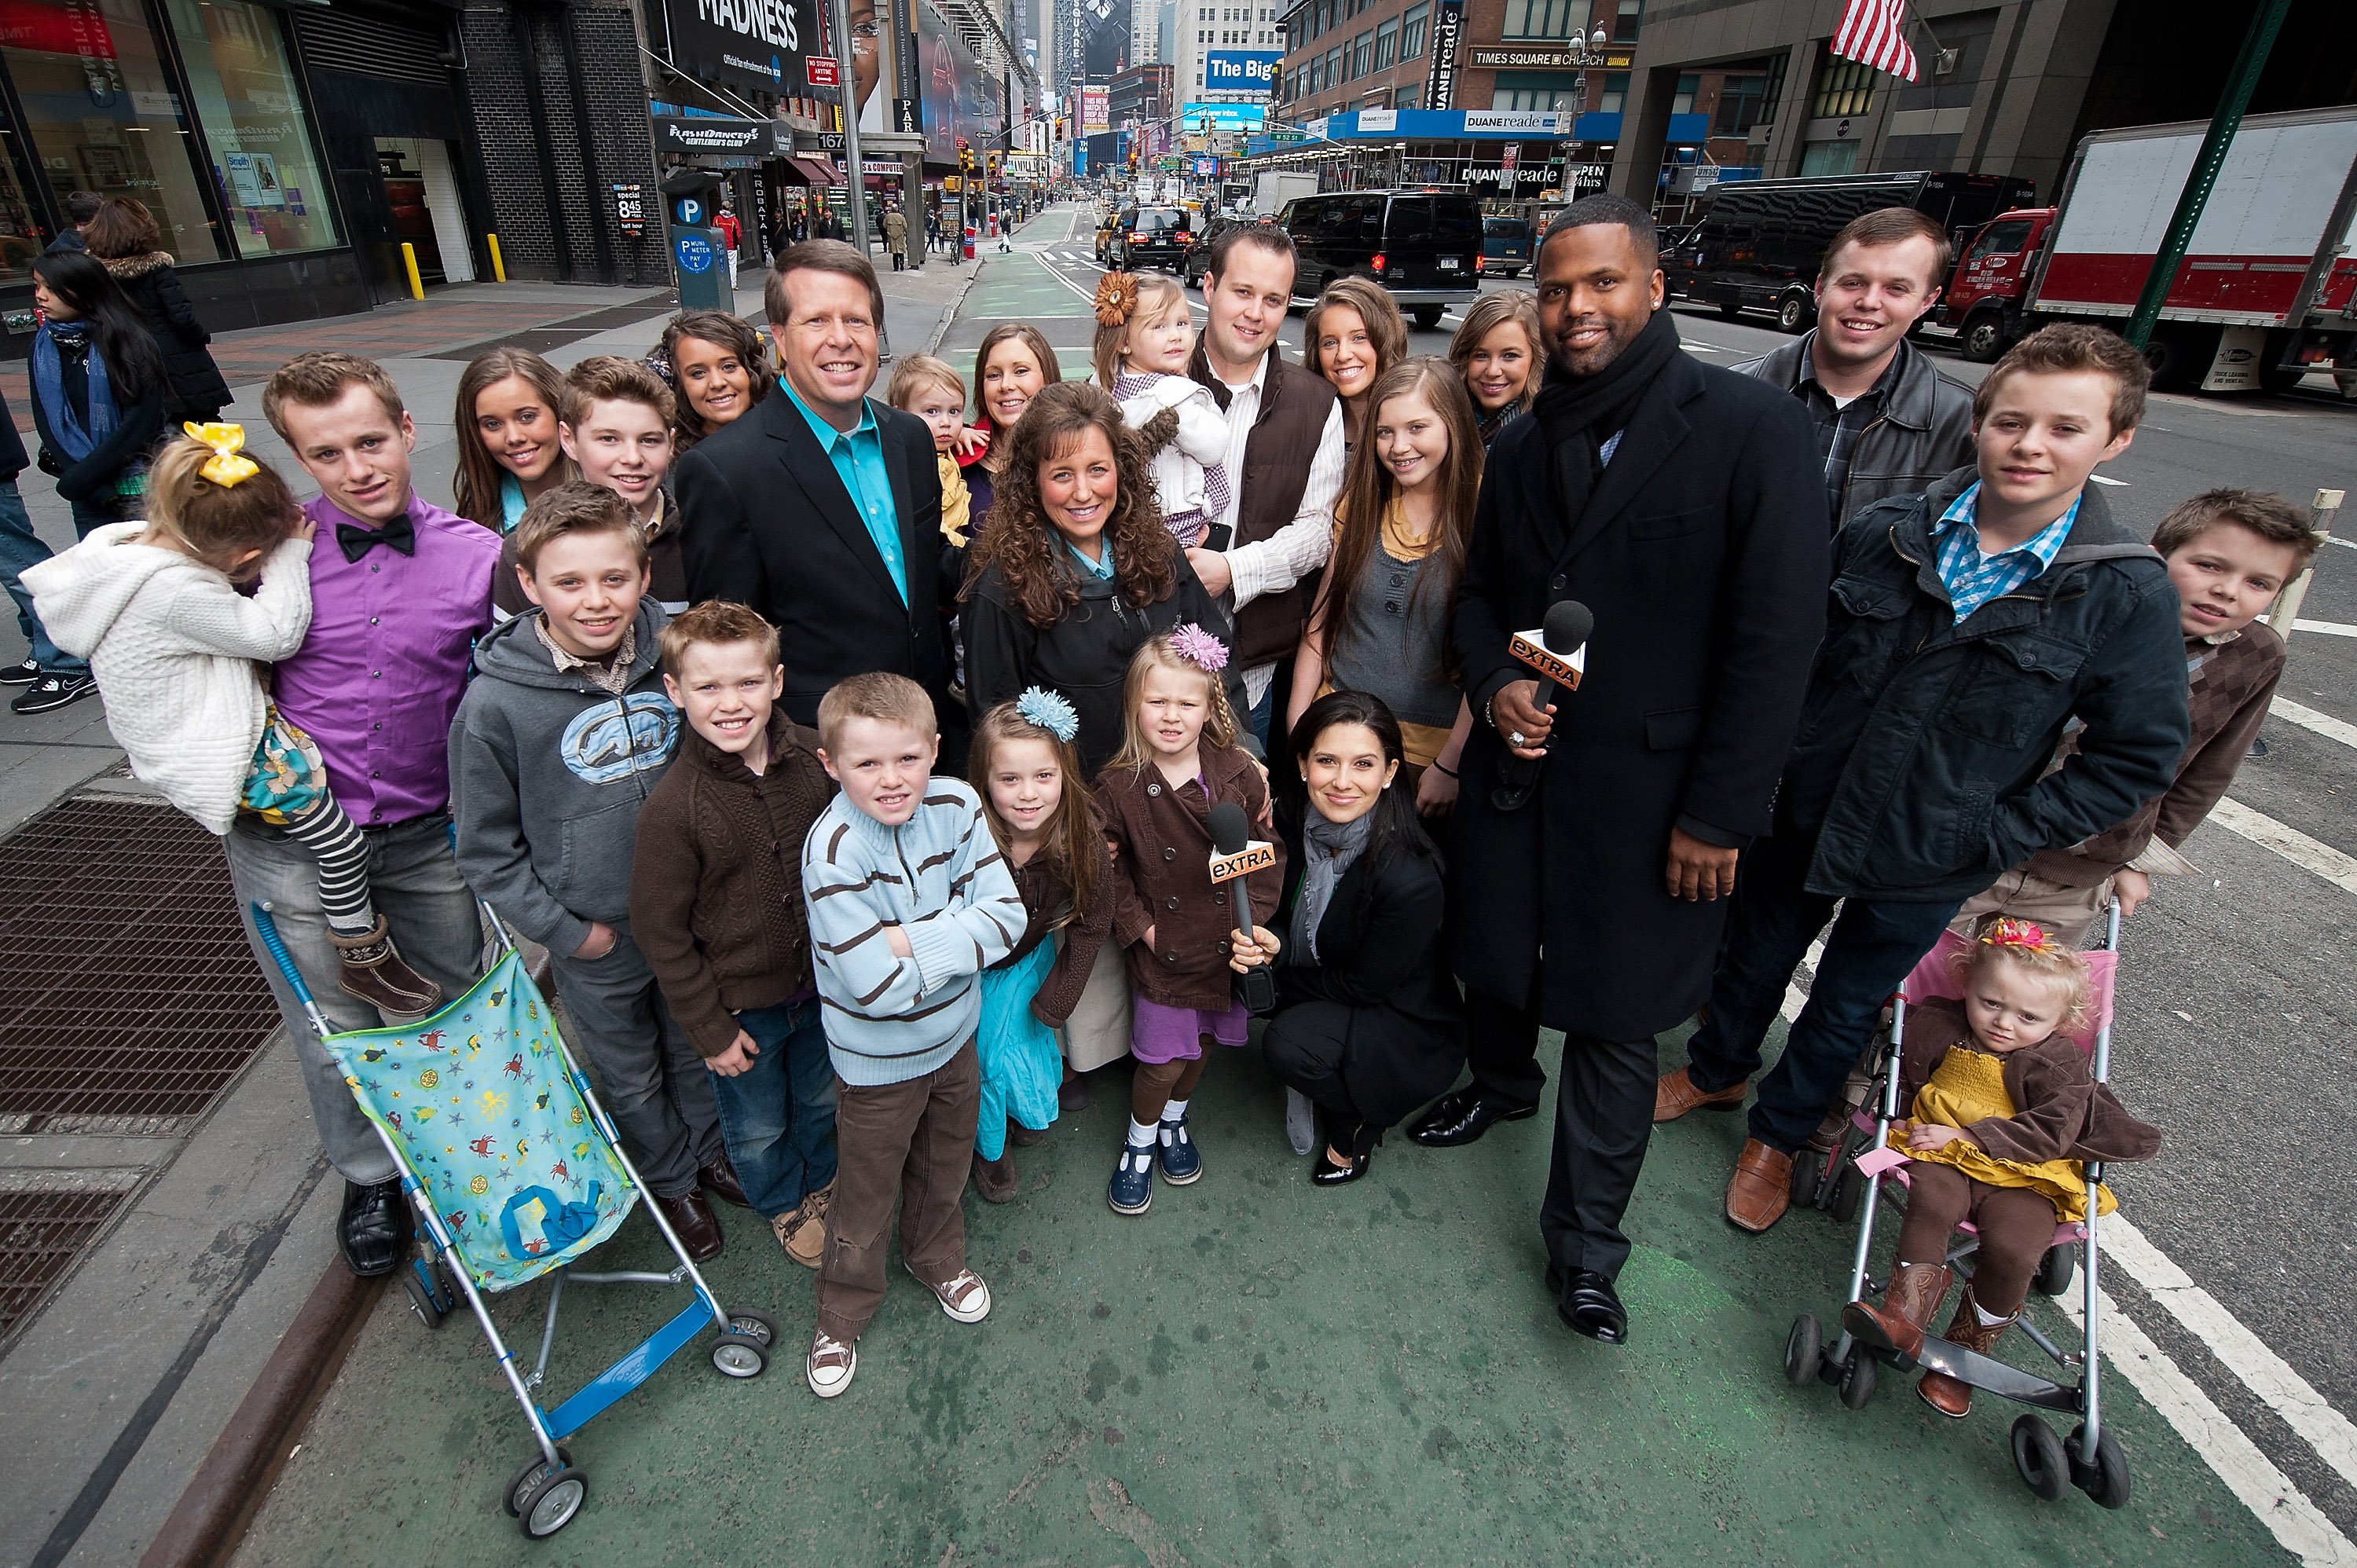 Members of the Duggar family from the TLC show '19 Kids and Counting' and 'Counting On' standing on an NYC street